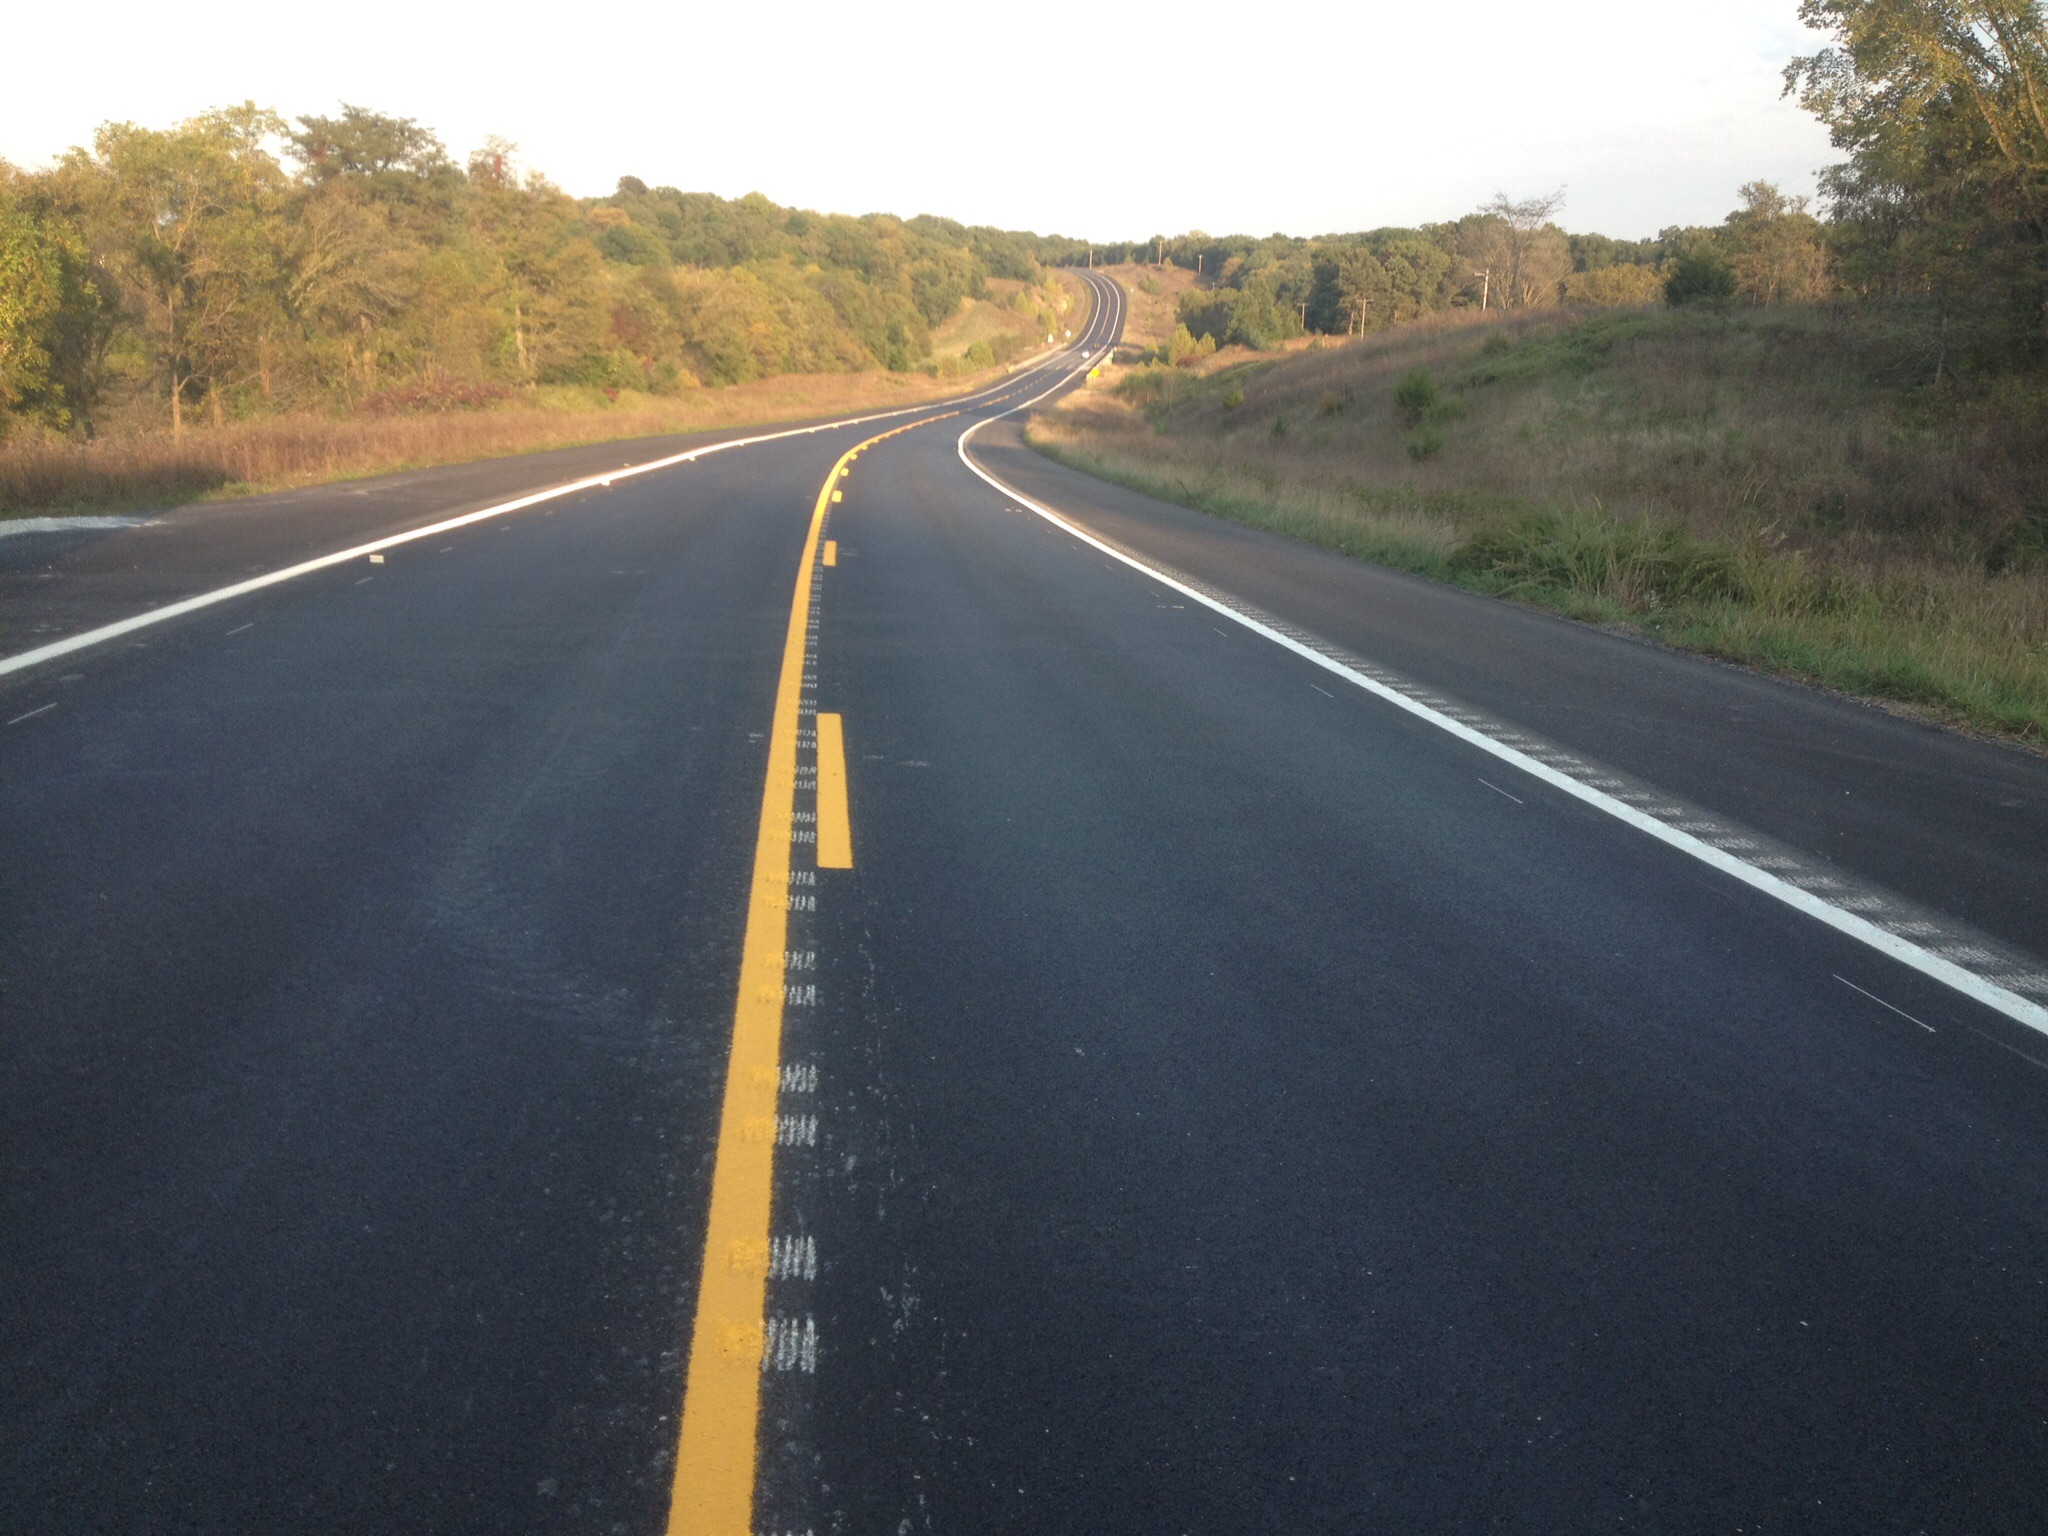 Finished roadwork picture of Highway 24 in Mid-Missouri.